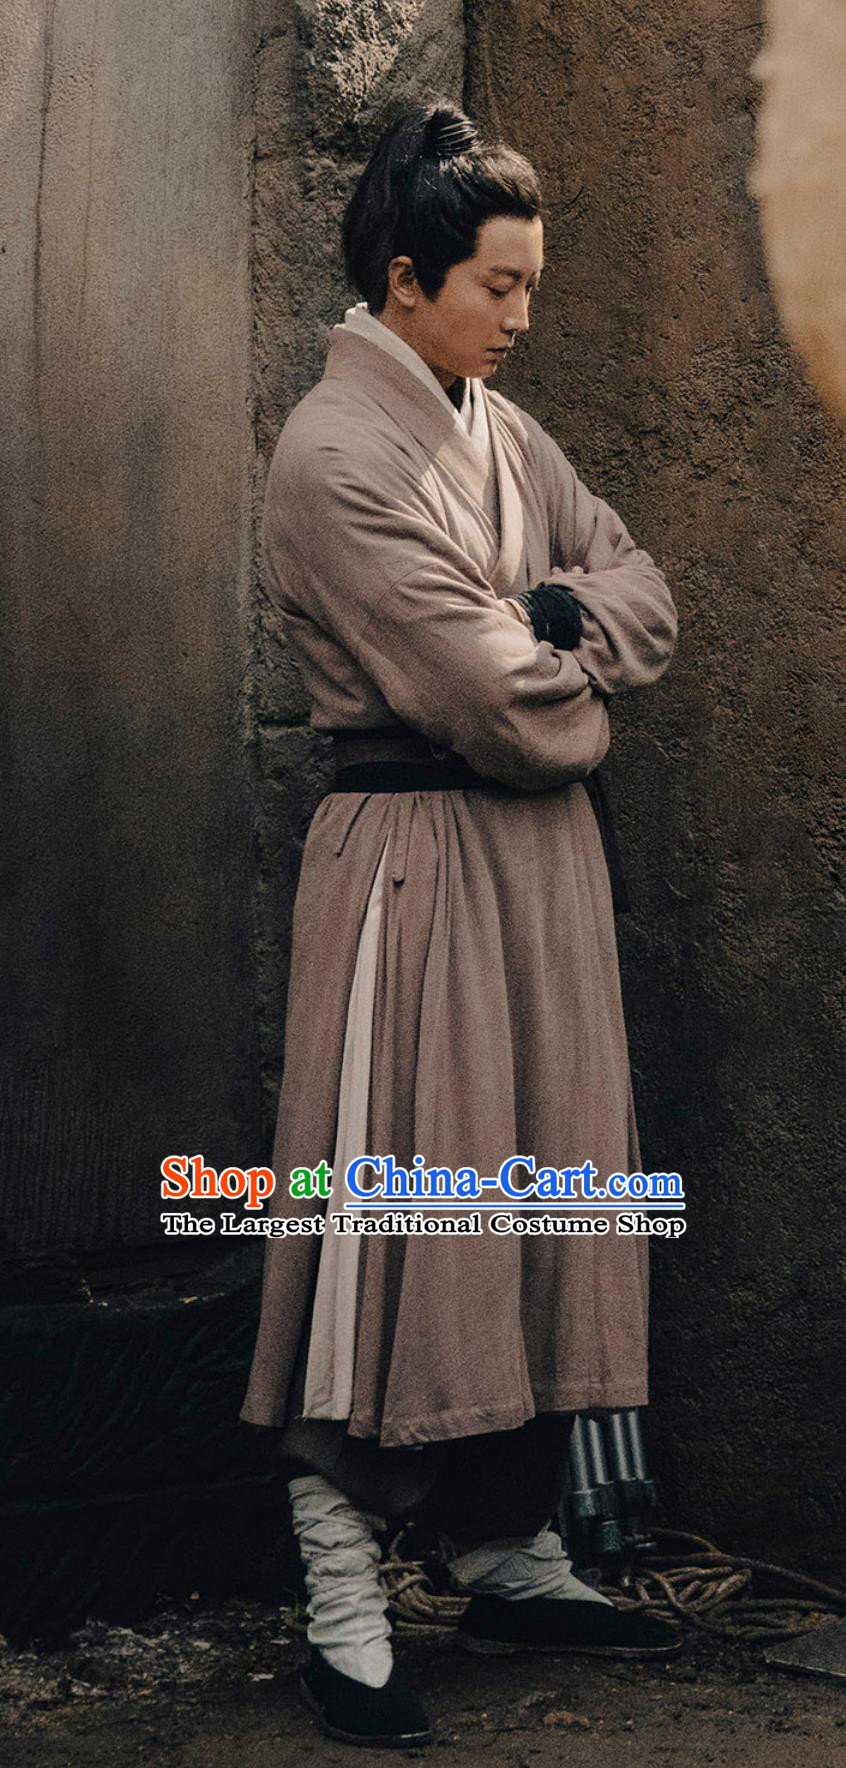 Chinese Historical TV Series Ripe Town Clerk Liu Shi Qi Outfit Ancient Ming Dynasty Civilian Male Garment Costumes